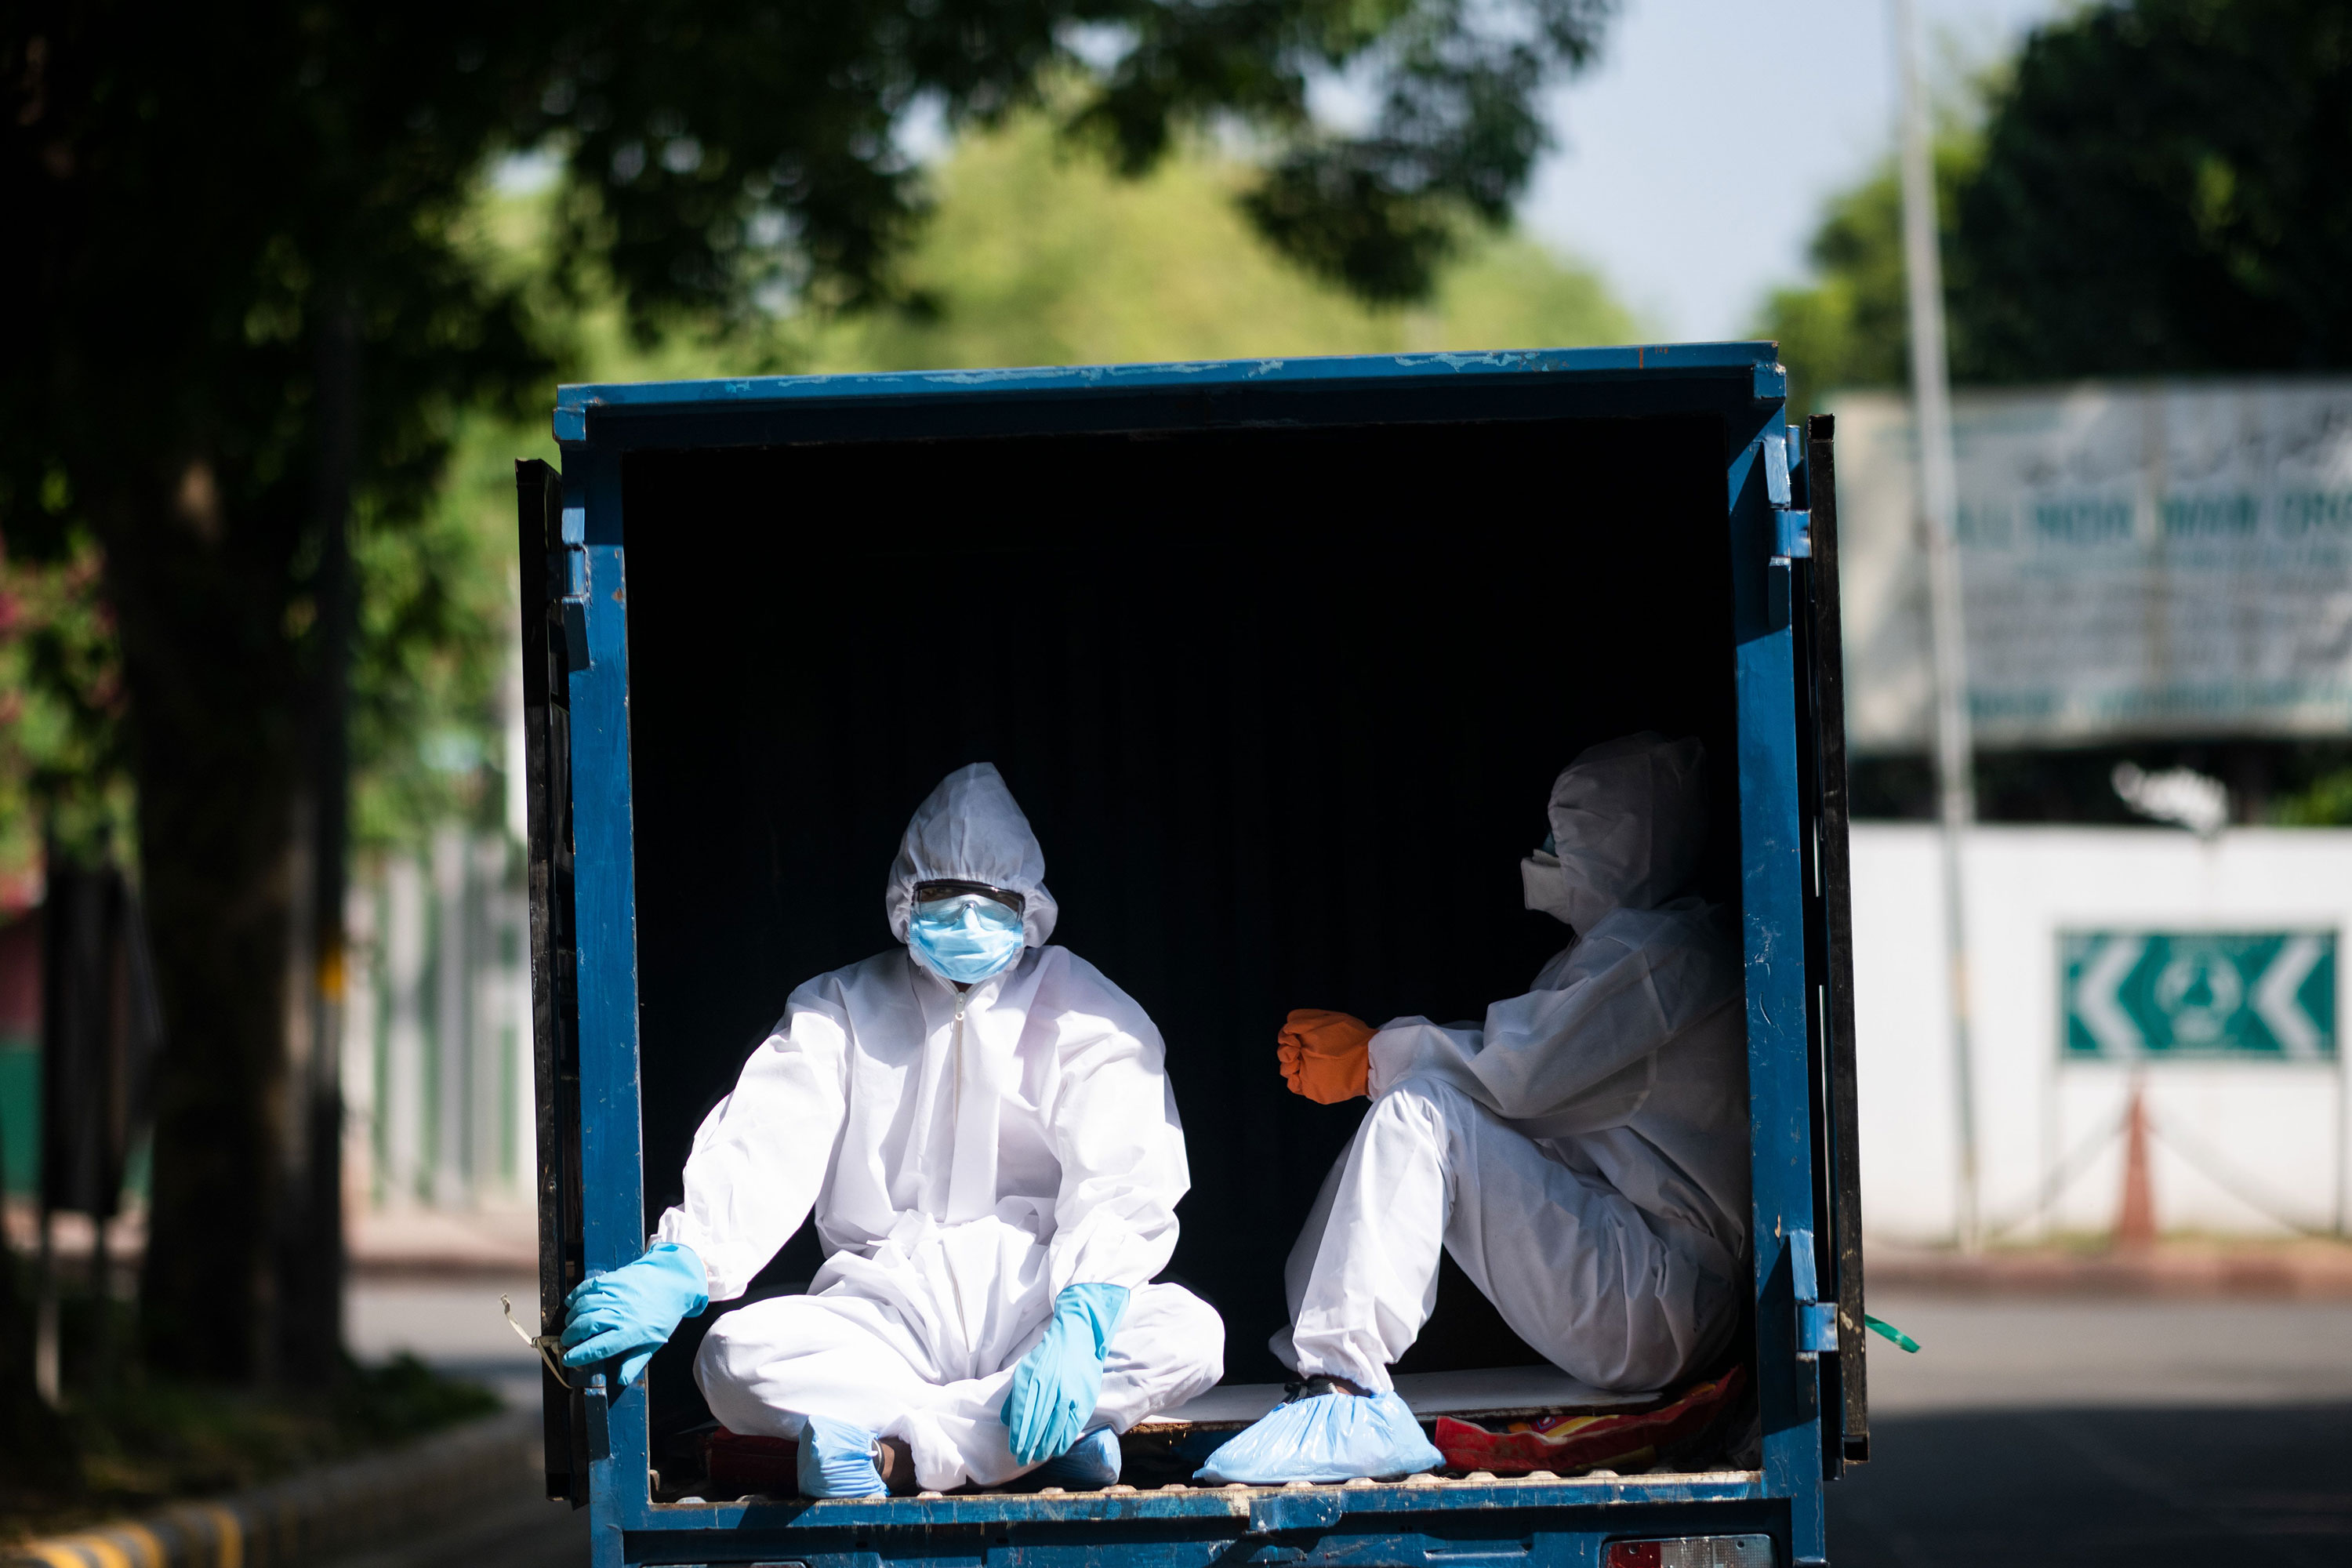 Men wearing protective clothing ride in the back of a vehicle in New Delhi on May 4.